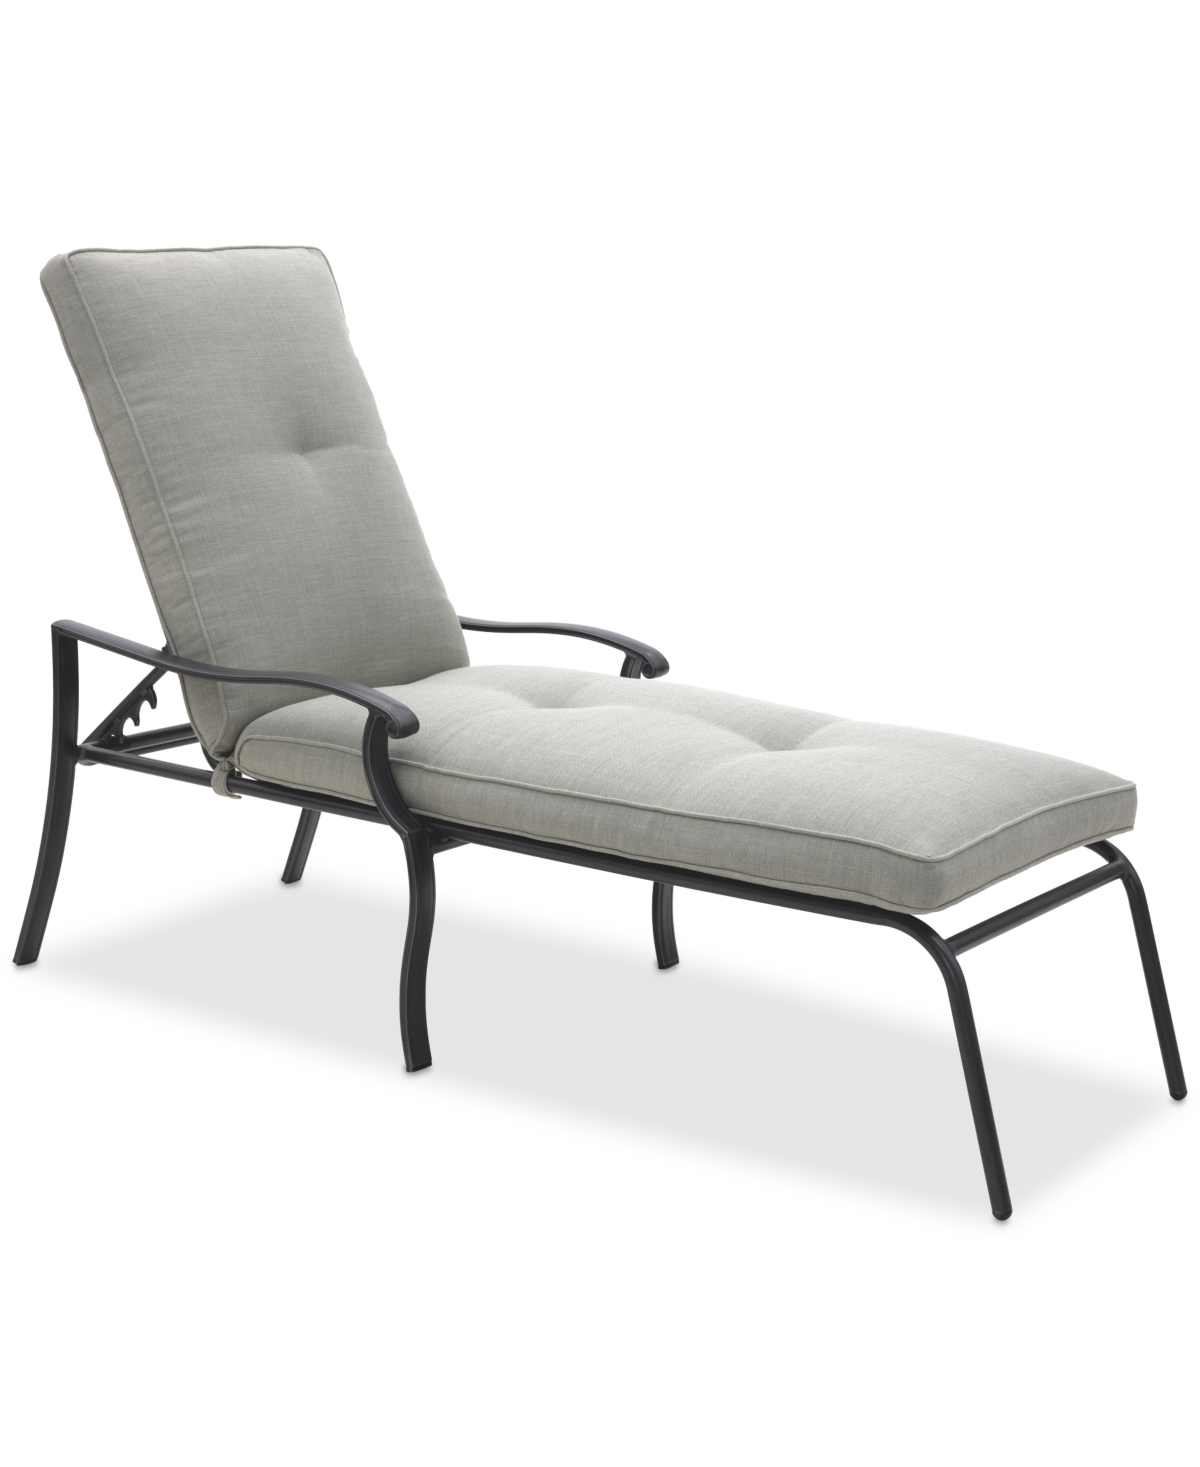 Shop Agio Wythburn Mix And Match Lattice Outdoor Chaise Lounge In Oyster Light Grey,pewter Finish